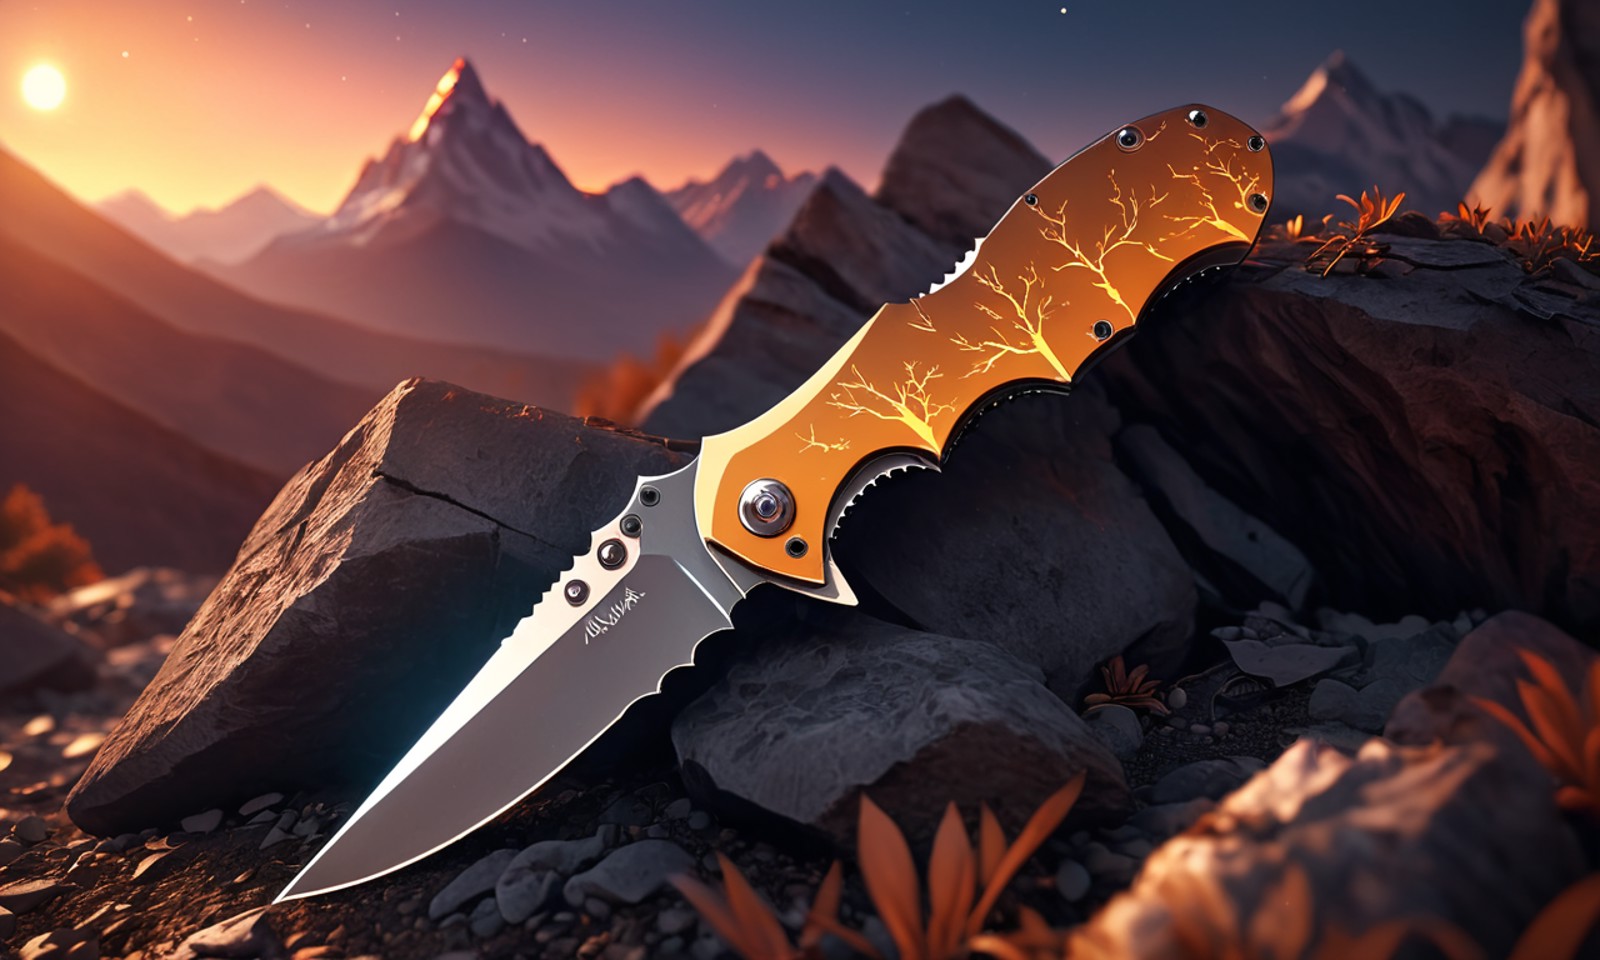 Thick layered papercut art of Semi-Abstract knife, folding knife implanted into ground, shining object, Amber sky, distant...